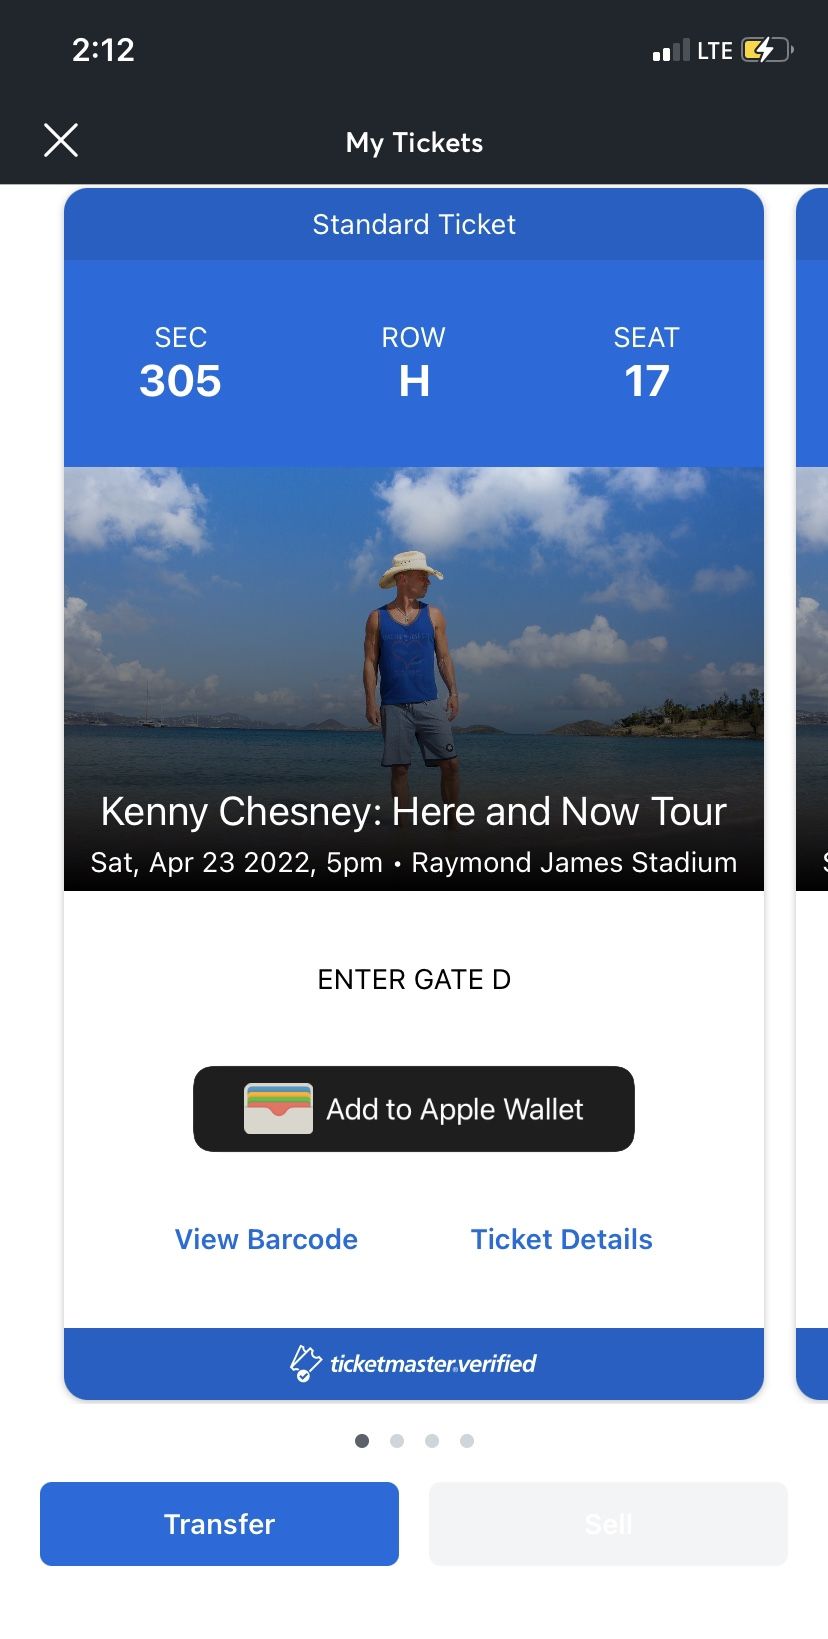 Kenney chesney tickets - Tampa April 2022